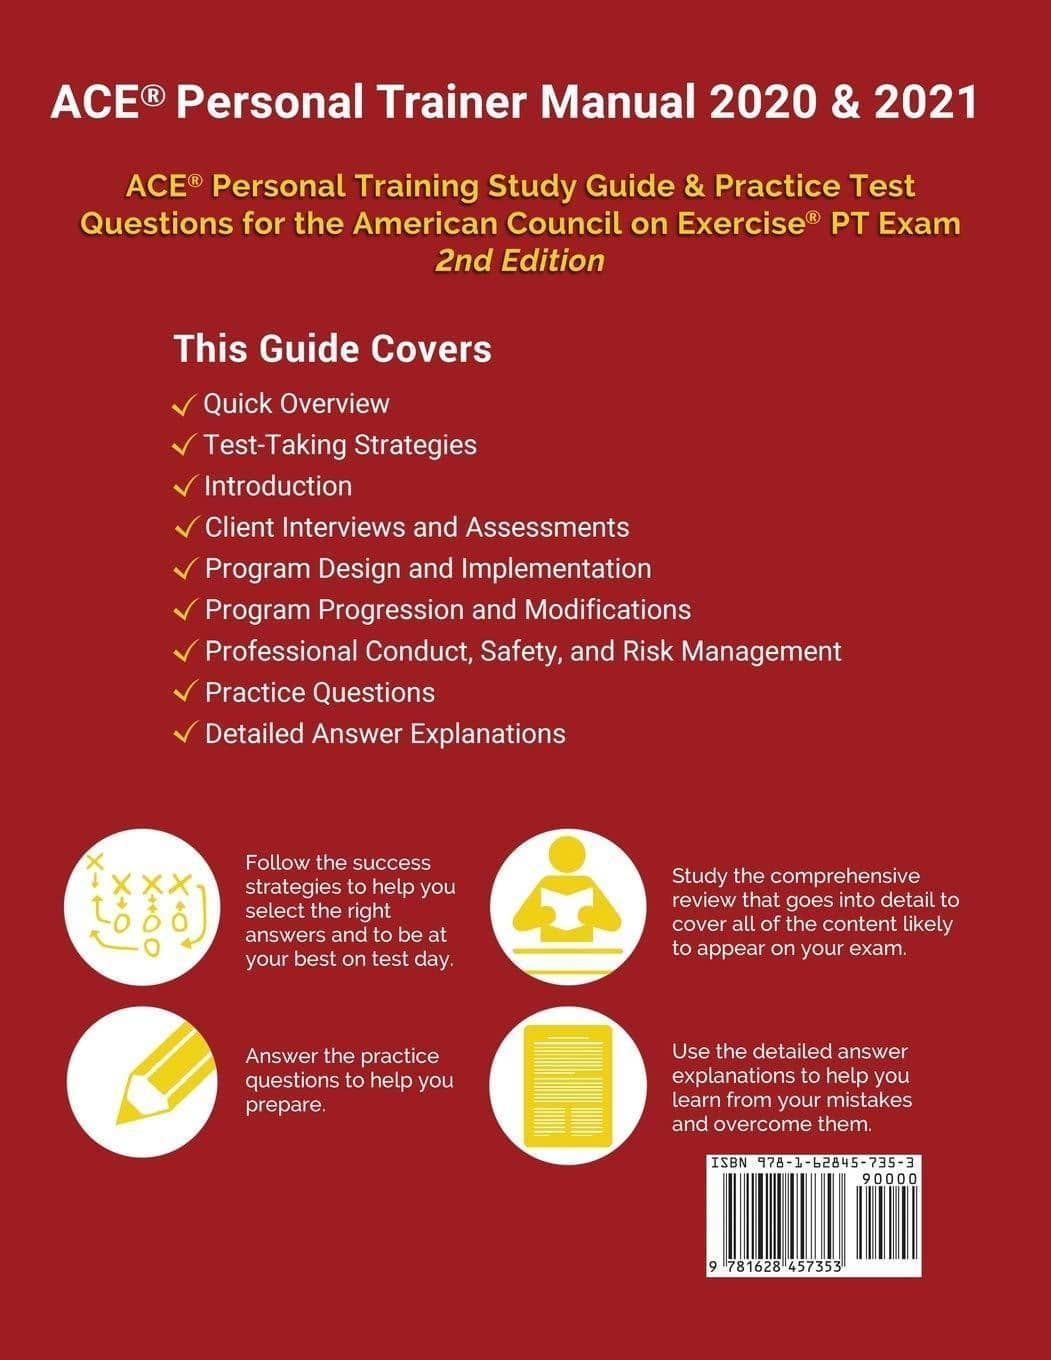 ACE Personal Trainer Manual 2020 and 2021: ACE Personal Training - SureShot Books Publishing LLC